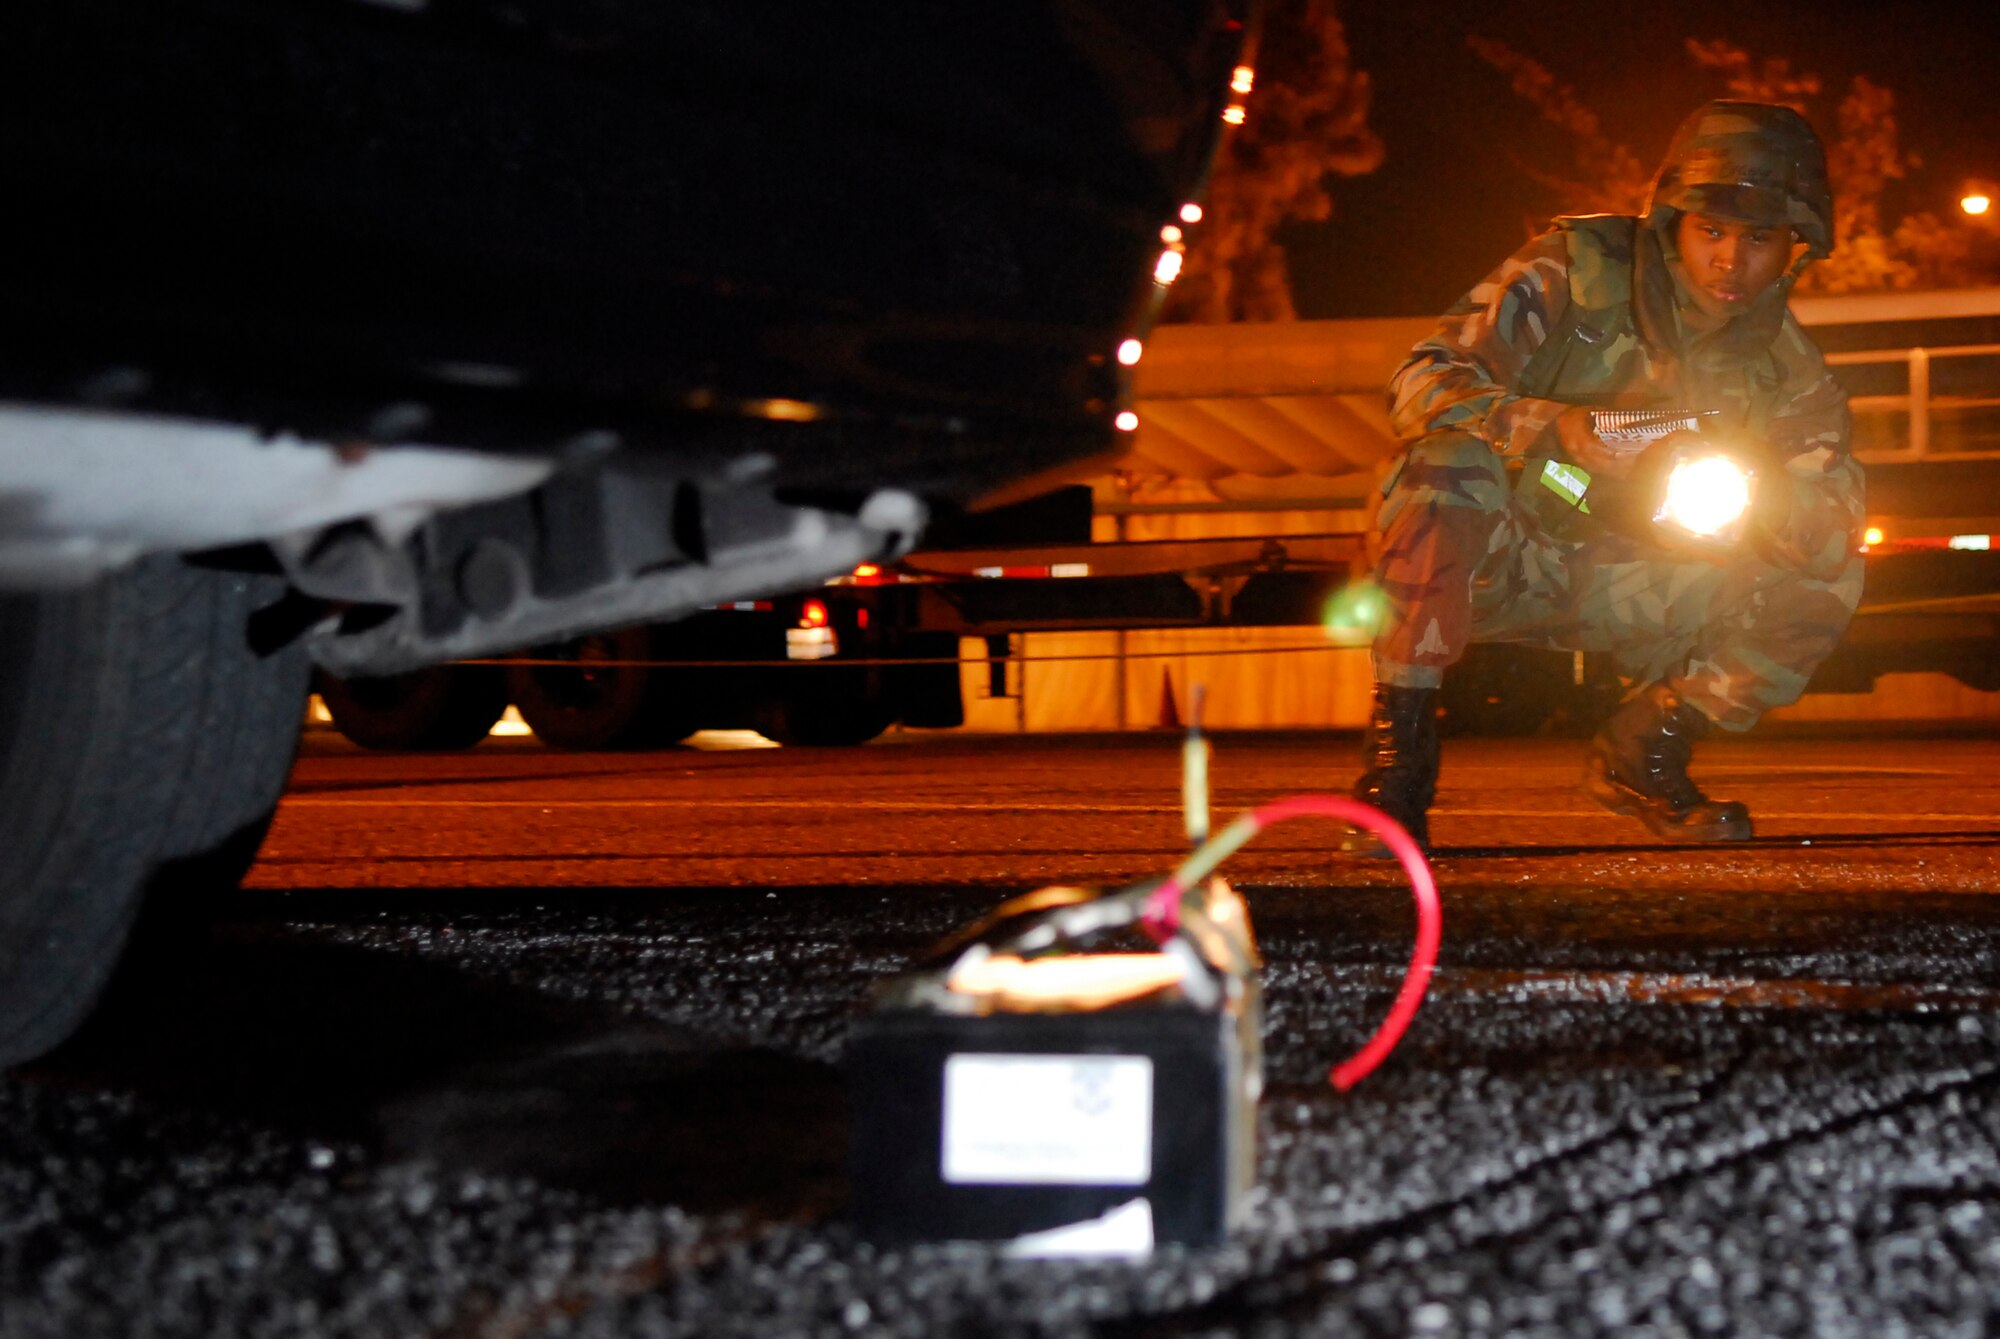 Airman Eugene Washington, 18th Logistics Readiness Squadron, locates an improvised explosive device during sweep team training for the 2008 Pacific Air Forces Operational Readiness Inspection at Kadena Air Base, Japan, March 12, 2008. PACAF conducted the inspection from March 9 to 15 to validate mission readiness of the 18th Wing. (U.S. Air Force photo/Staff Sgt. Joshua J. Garcia) 